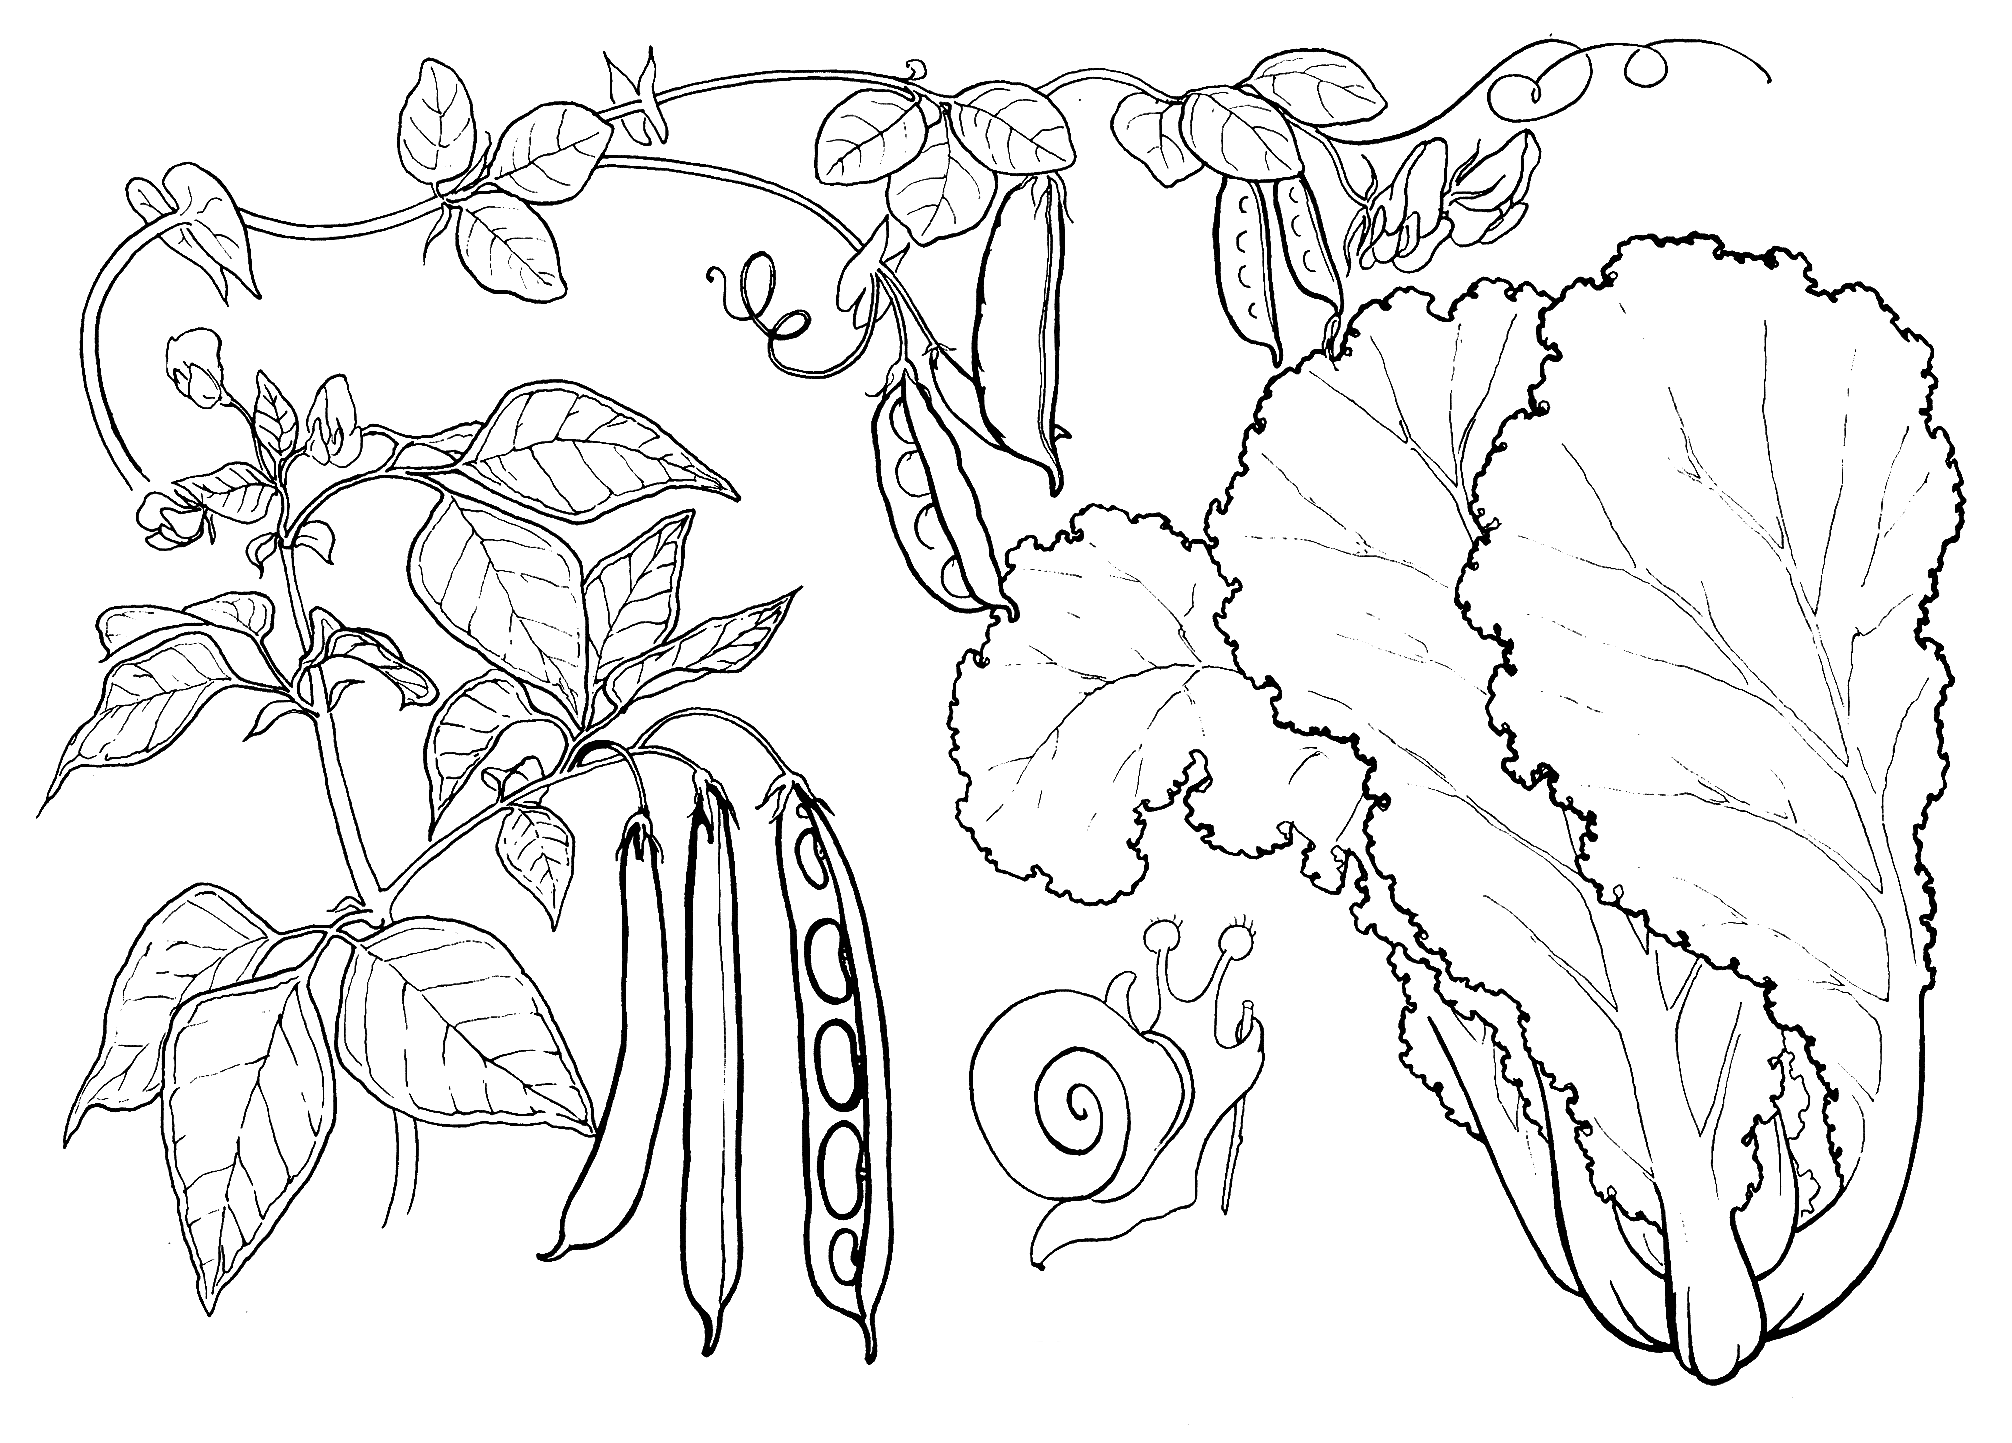 Coloring page - Lettuce, peas and beans